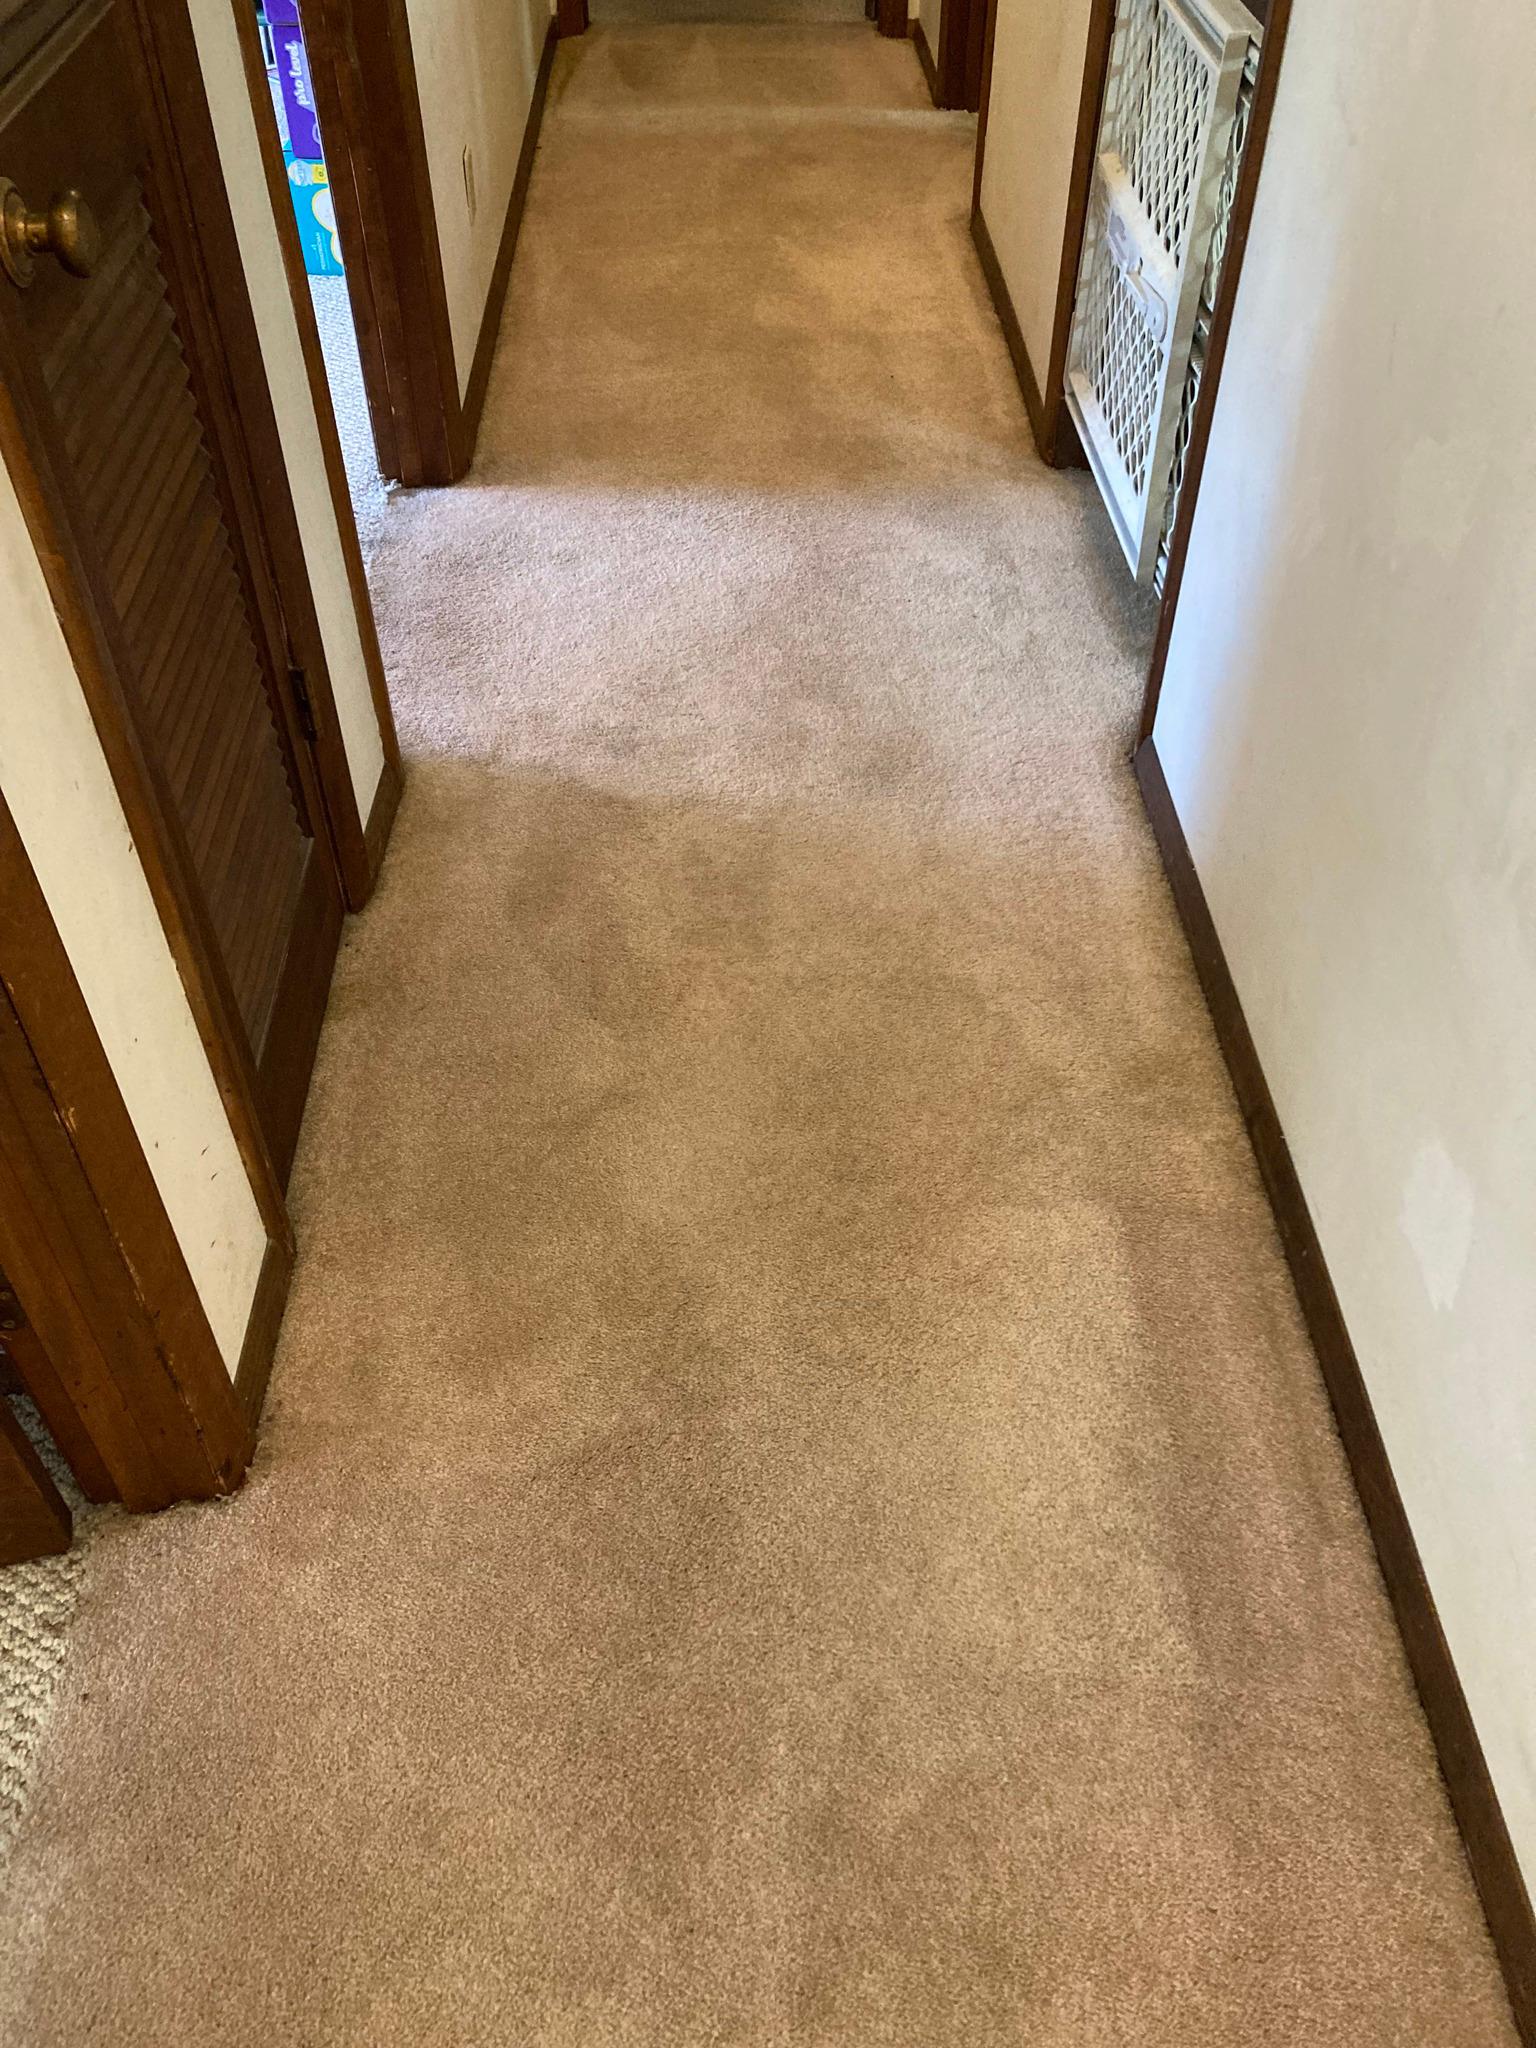 after a carpet cleaning White River Chem-Dry Muncie (765)217-4337